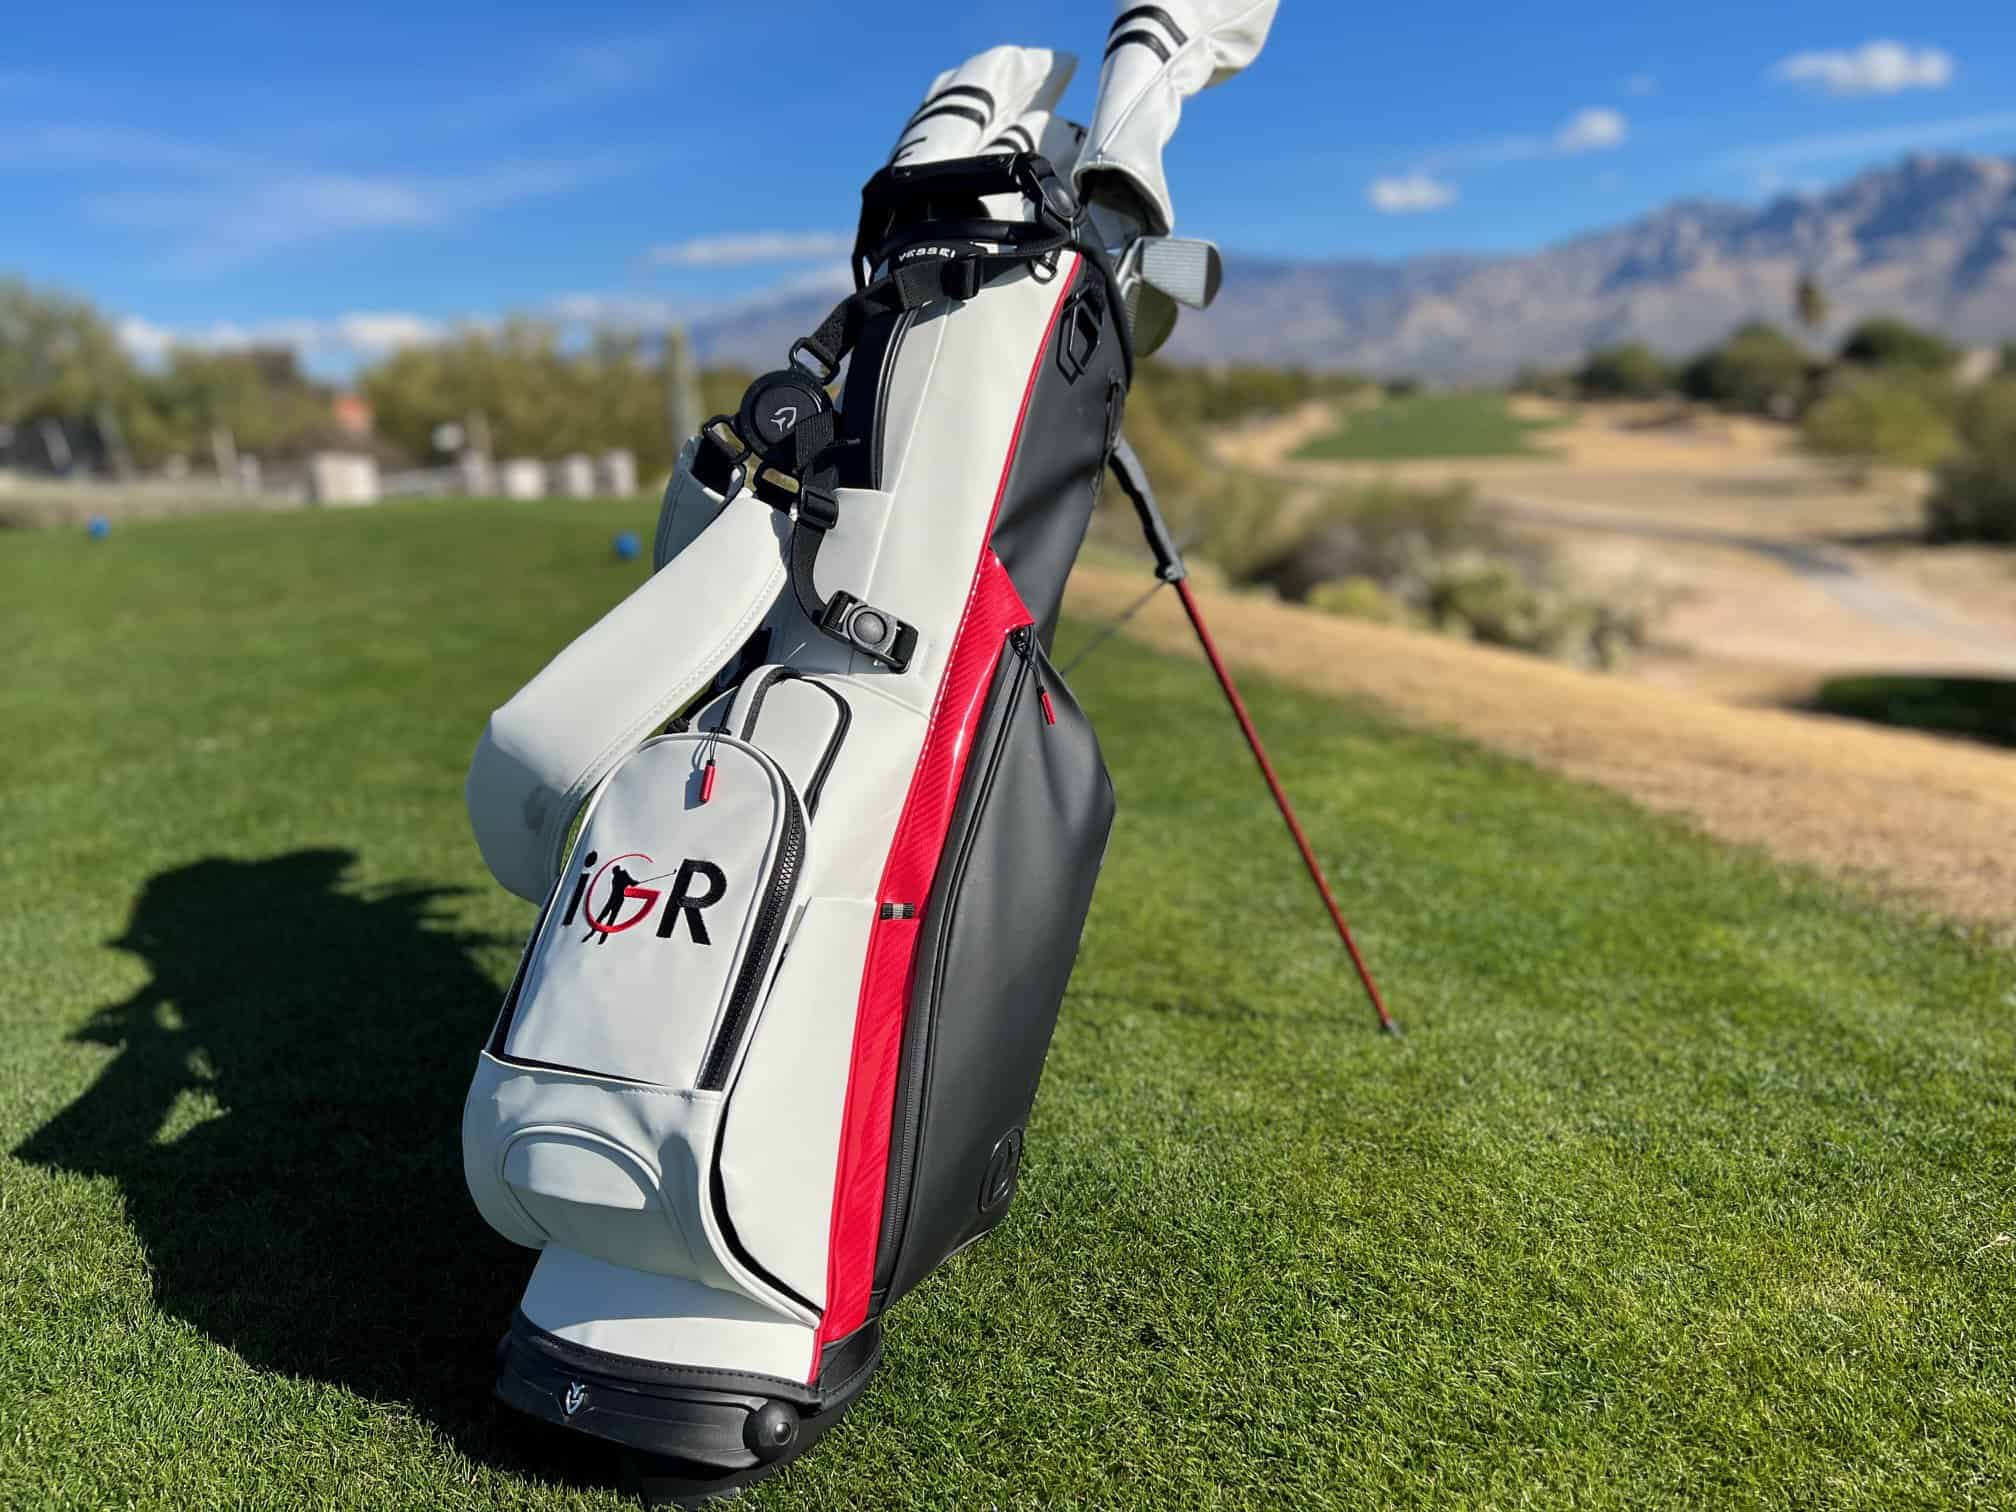 Vessel Player 4 bag review - Page 2 - Golf Bags/Carts/Headcovers